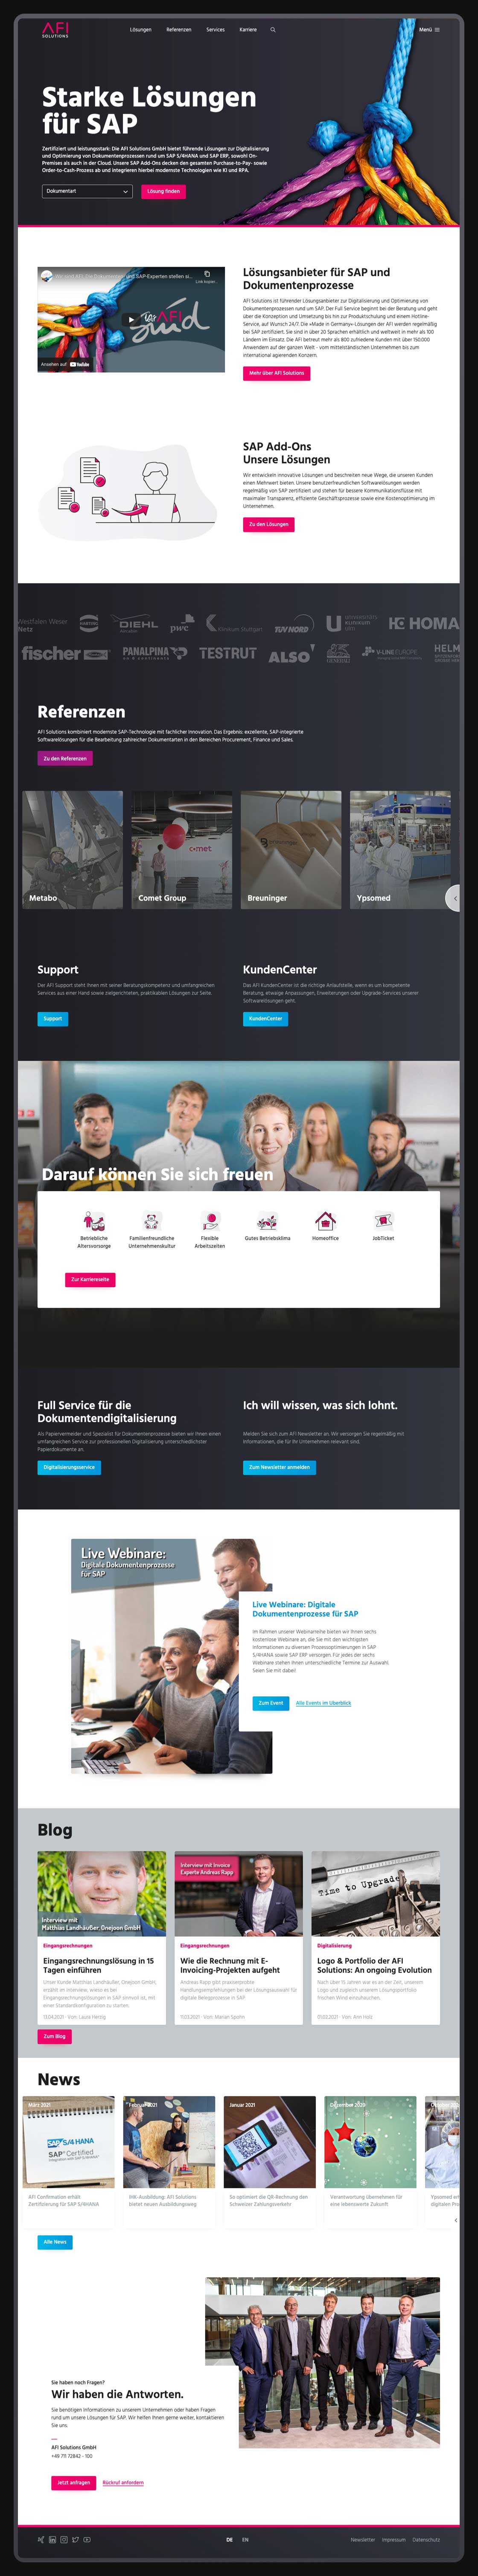 Screendesign of the AFI Solutions homepage